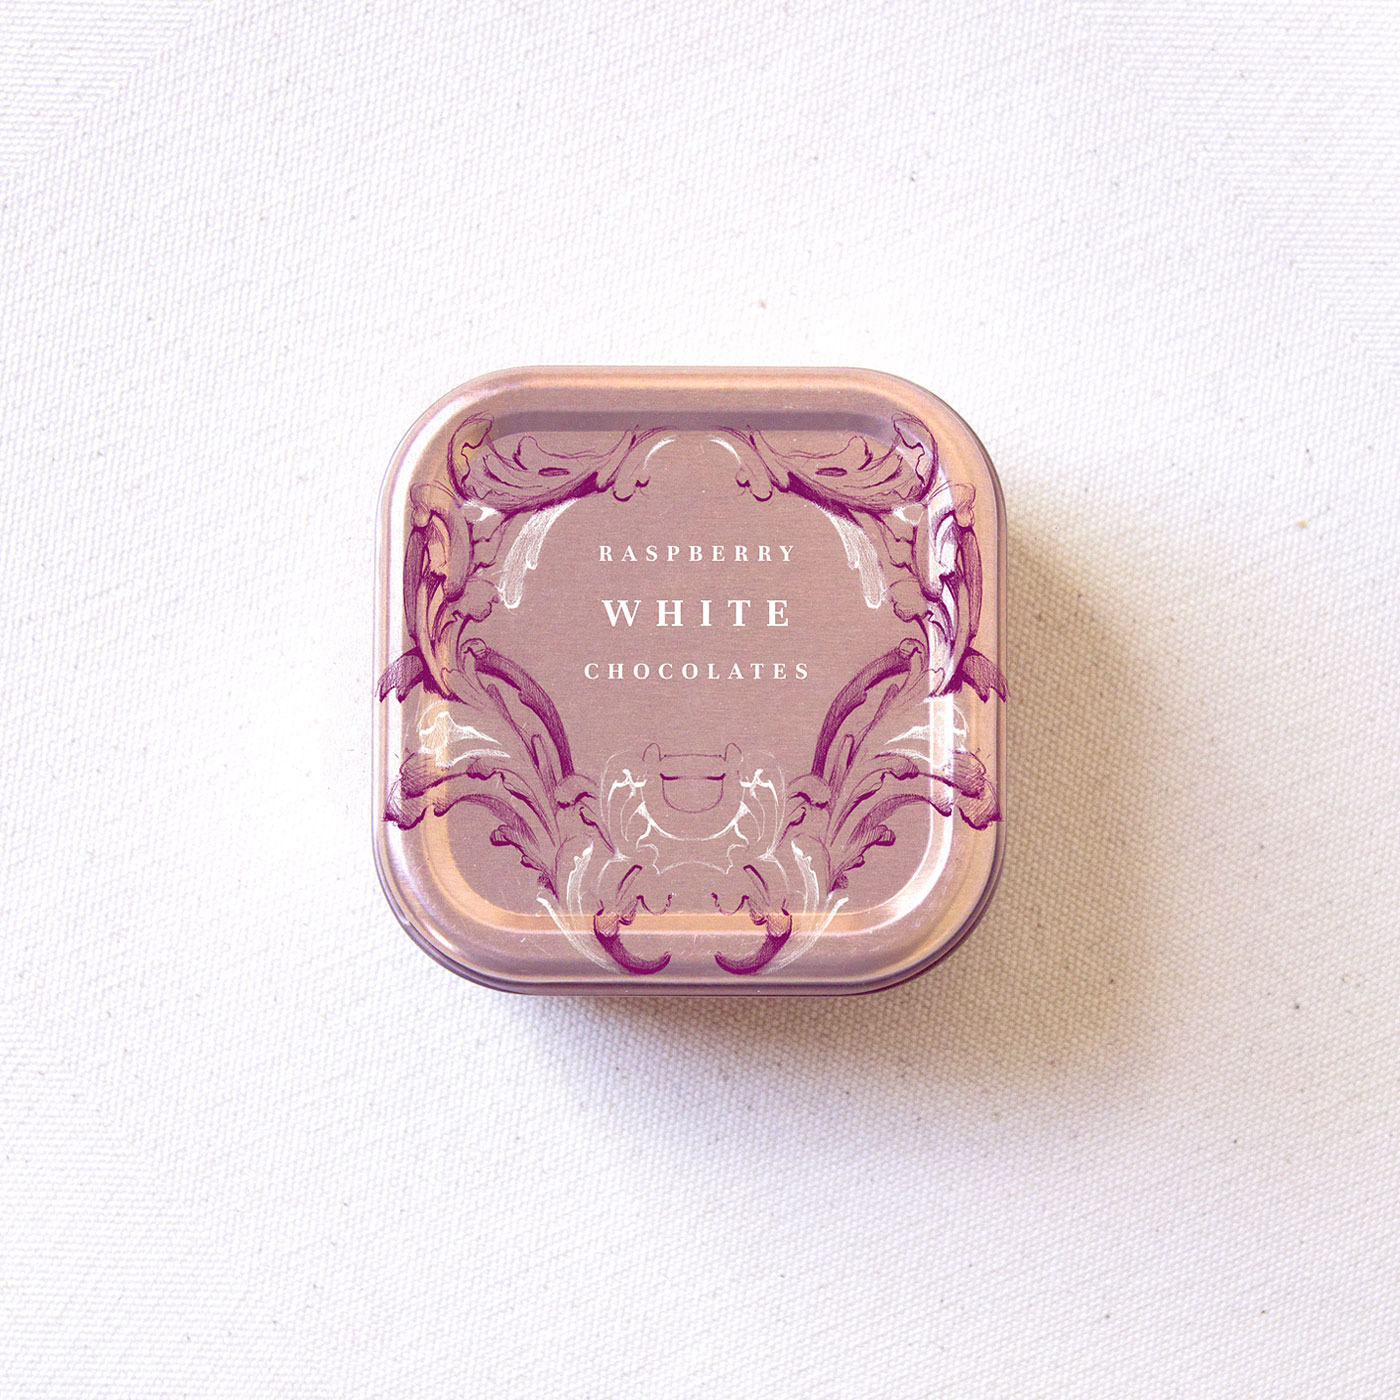 Rococo-inspired raspberry white chocolate metallic package illustration by Laura Dreyer.